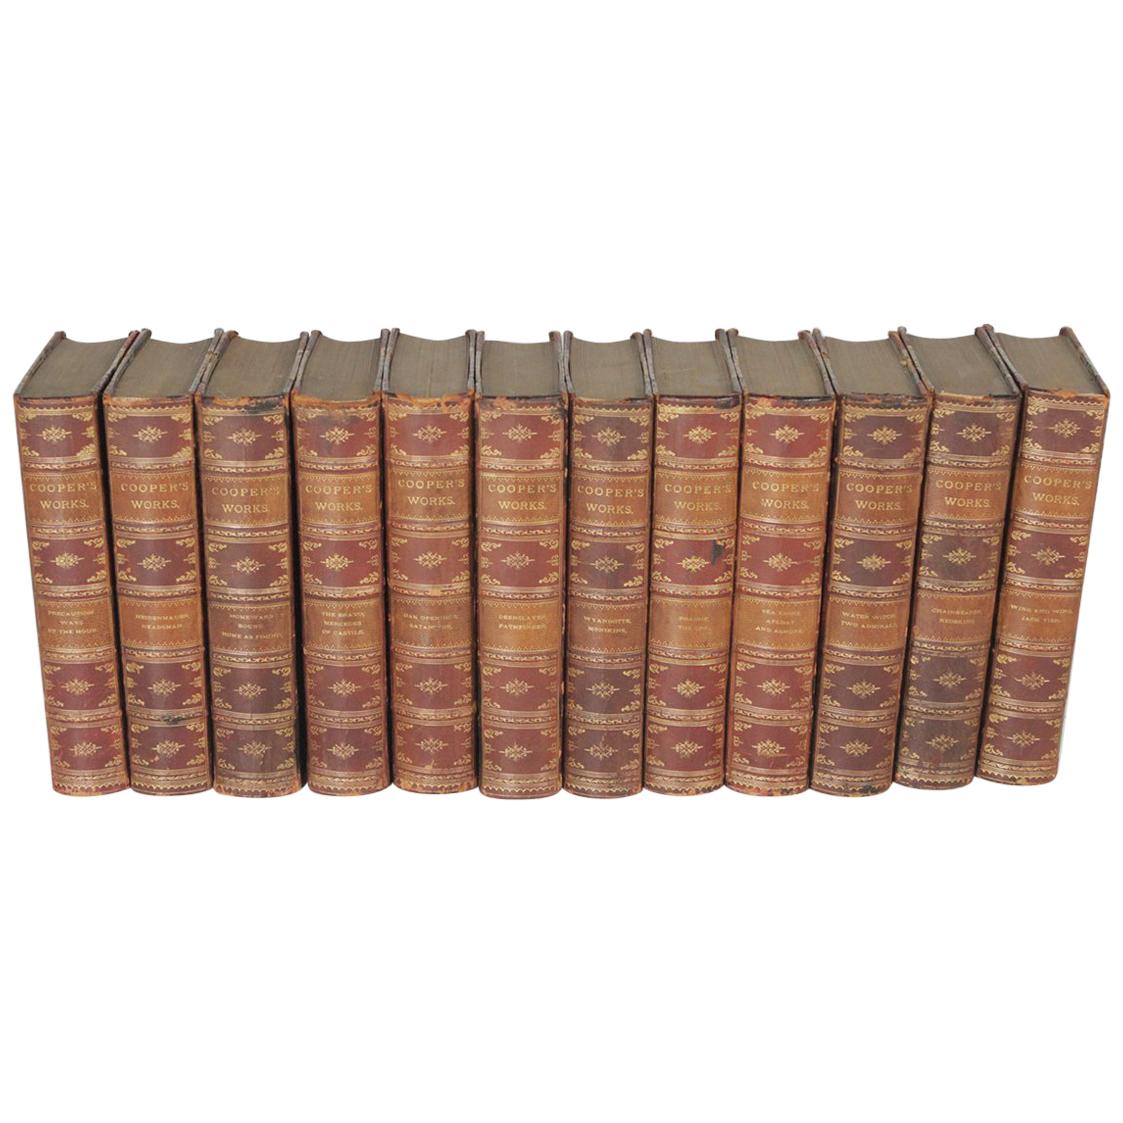 Set of 12 Cooper Works Leather Bound Books, Late 19th Century